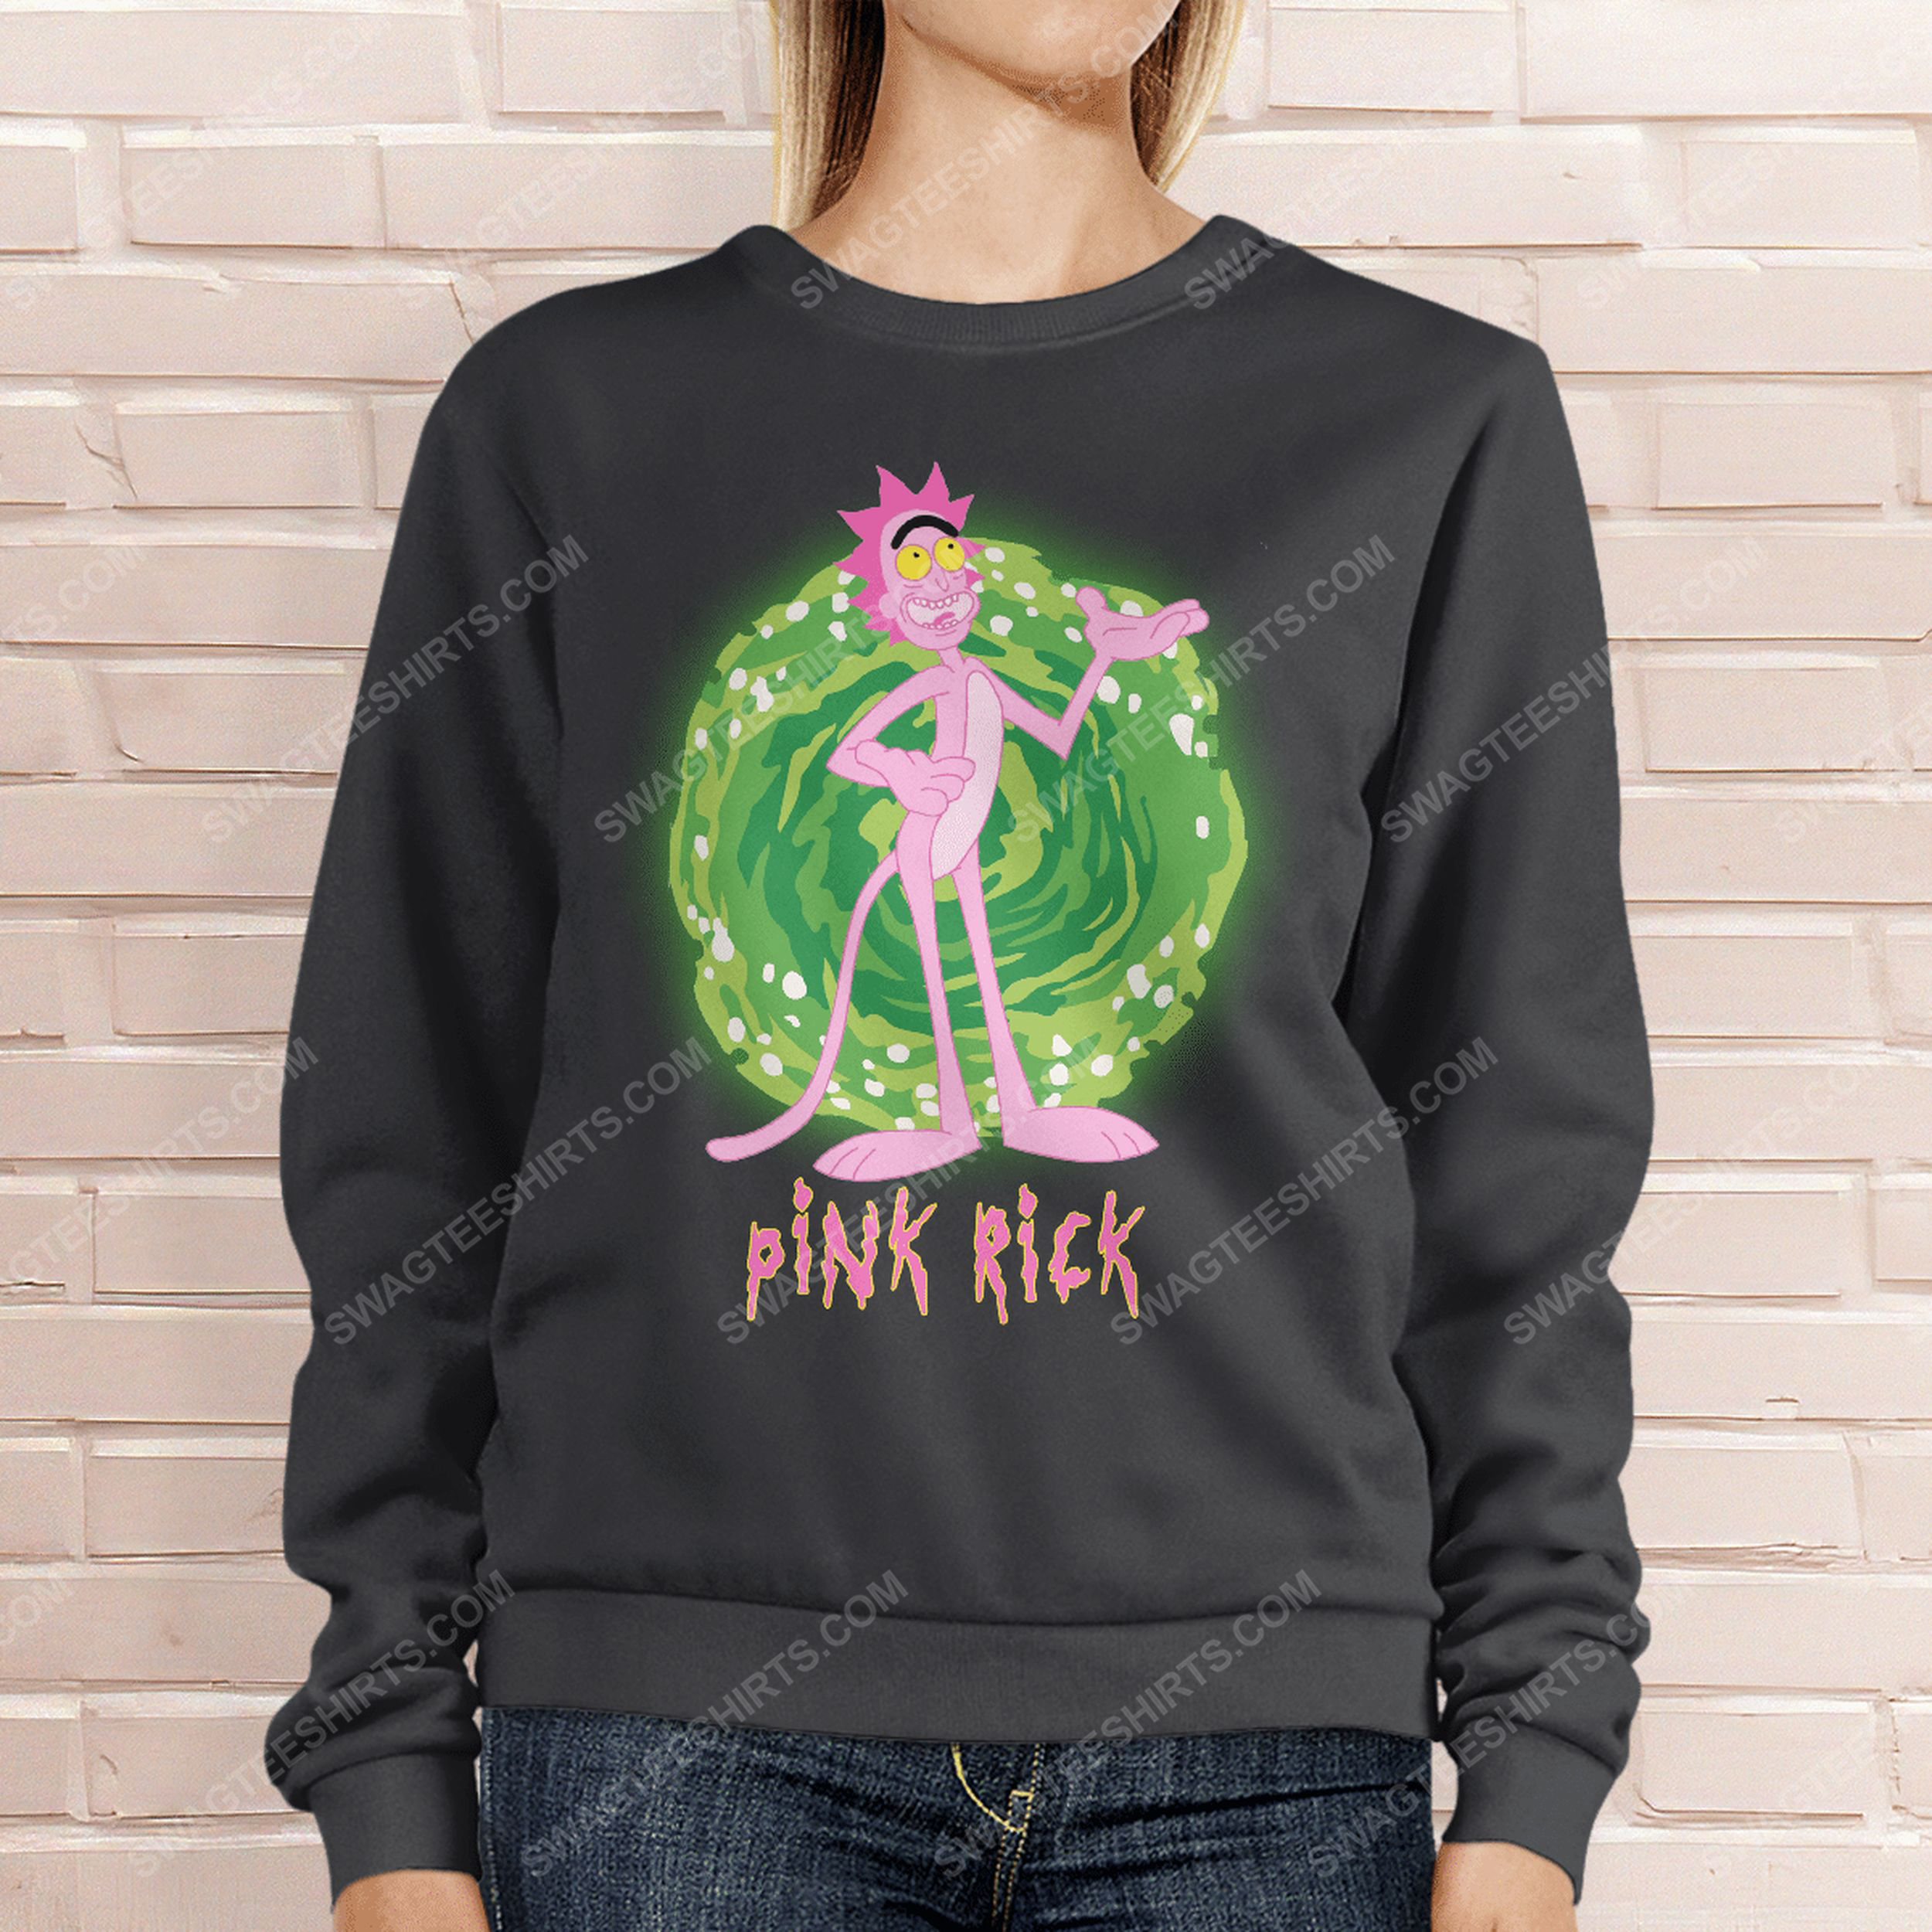 Tv show rick and morty and pink panther sweatshirt 1(1)